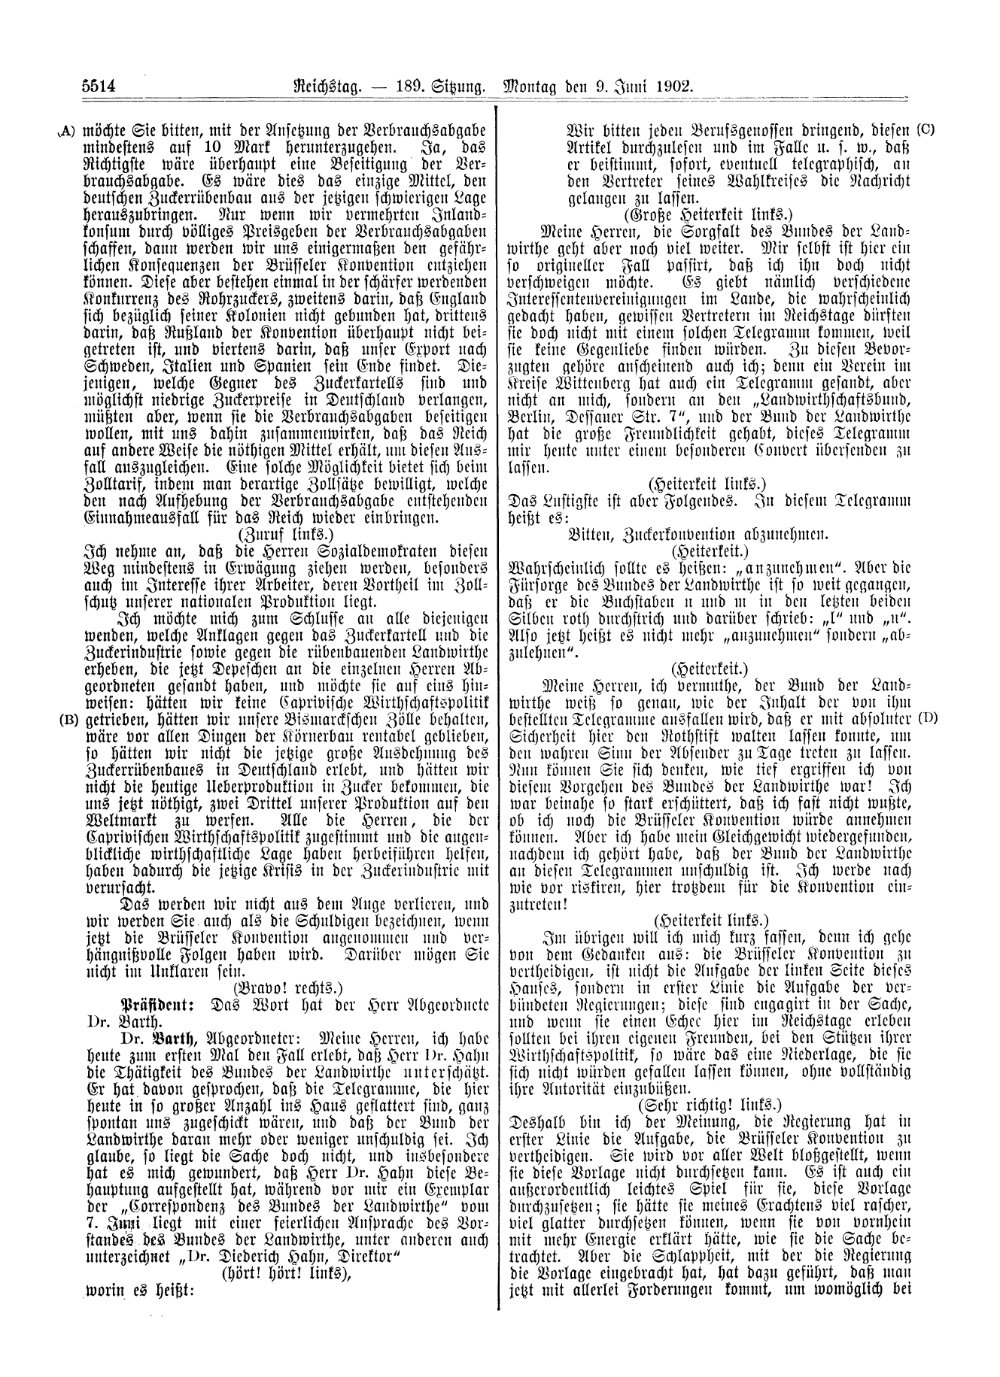 Scan of page 5514